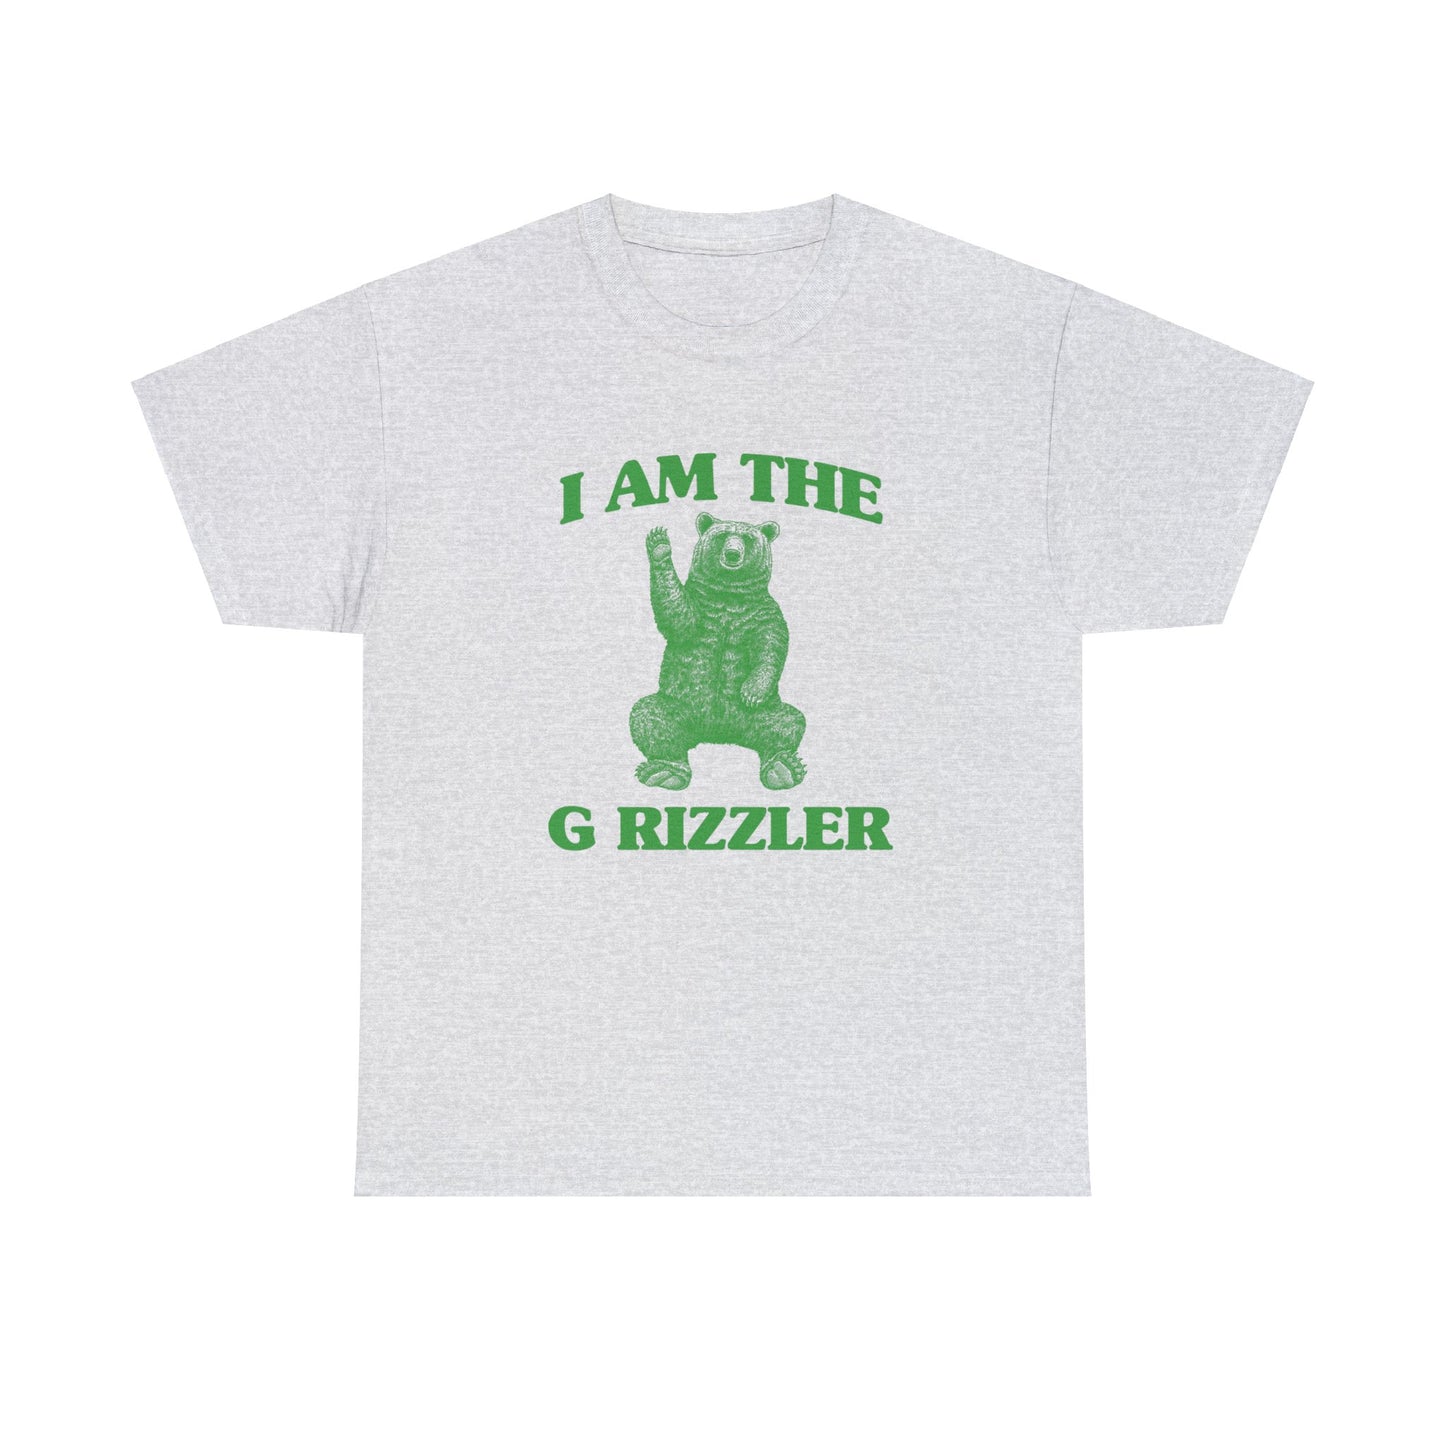 I am the G Rrizzler T-Shirt